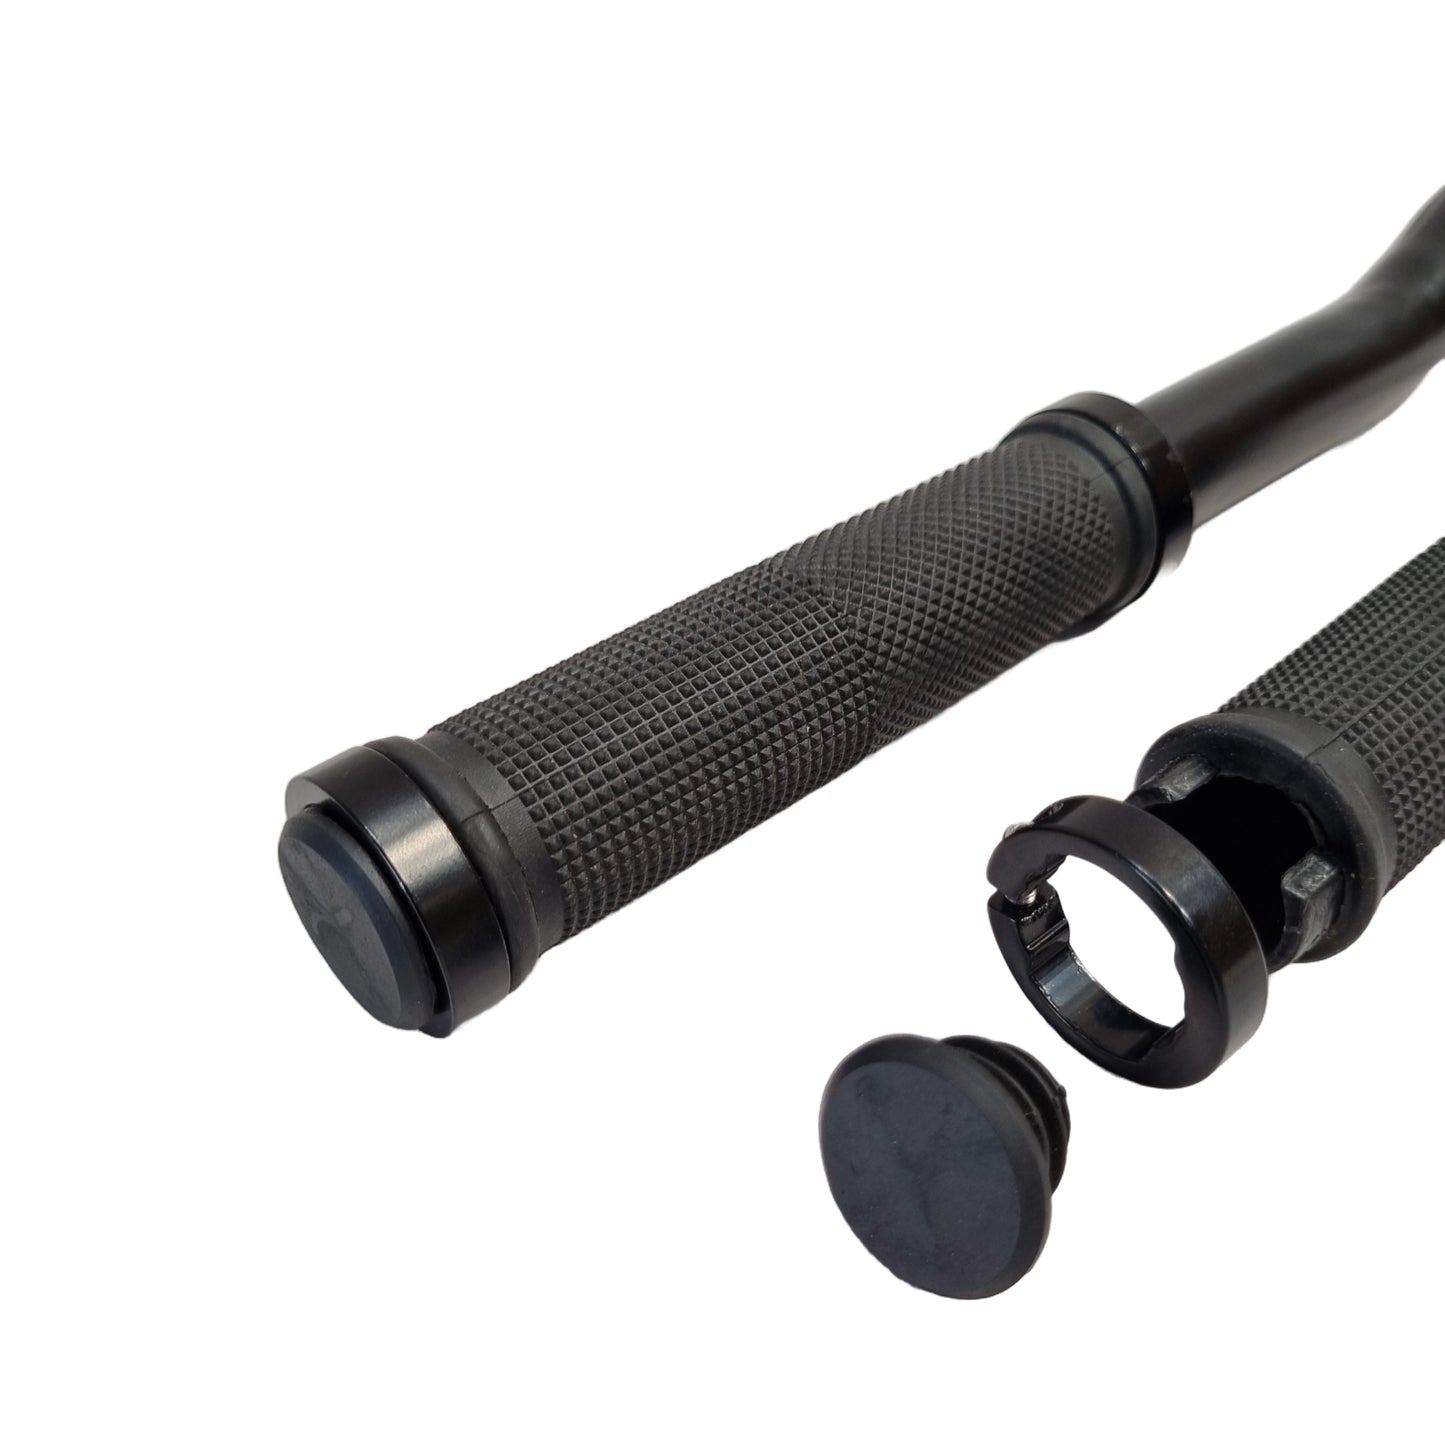 Lock-on Anti-Slip Bicycle Handlebar Handle Grip Black with double clamp buy online from omobikes 